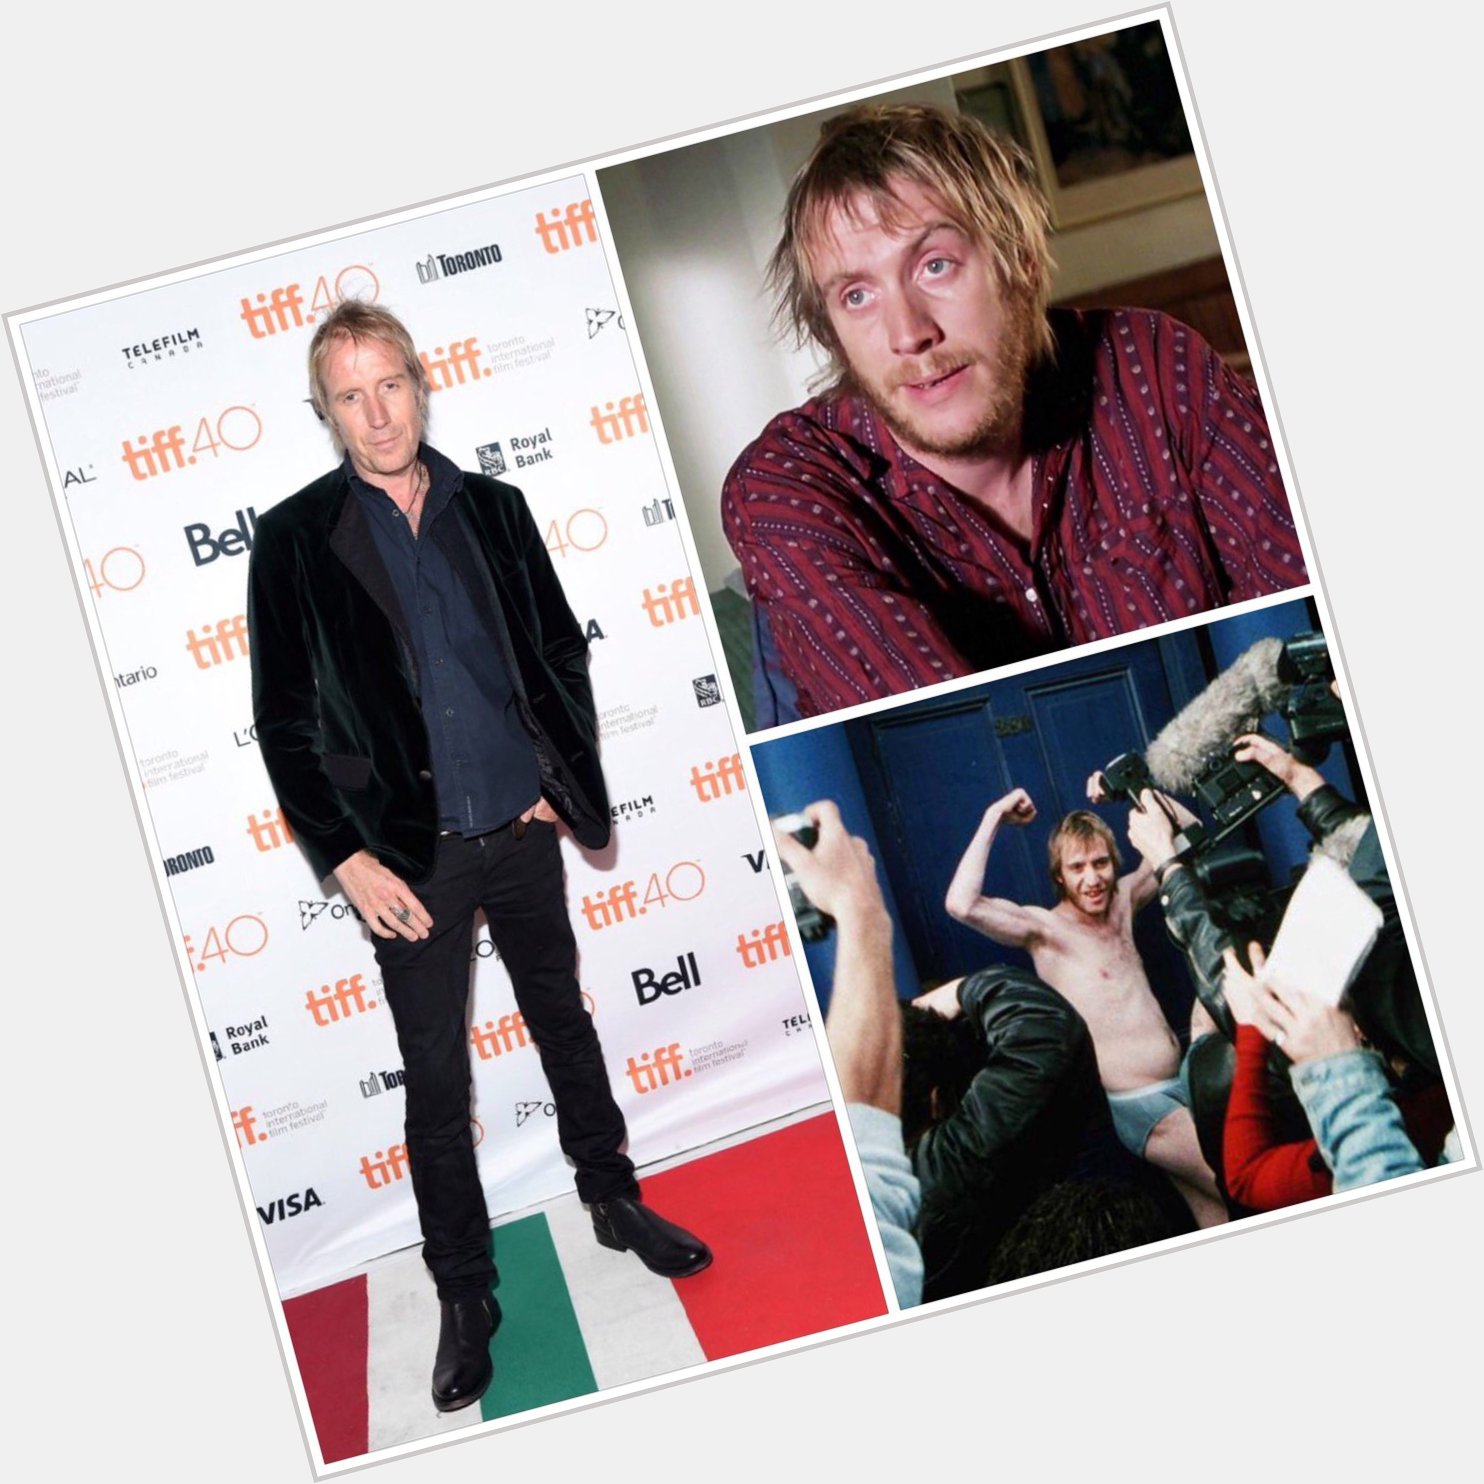  Happy 50th birthday to Welsh actor/producer Rhys Ifans! for NOTTING HILL (1999): 